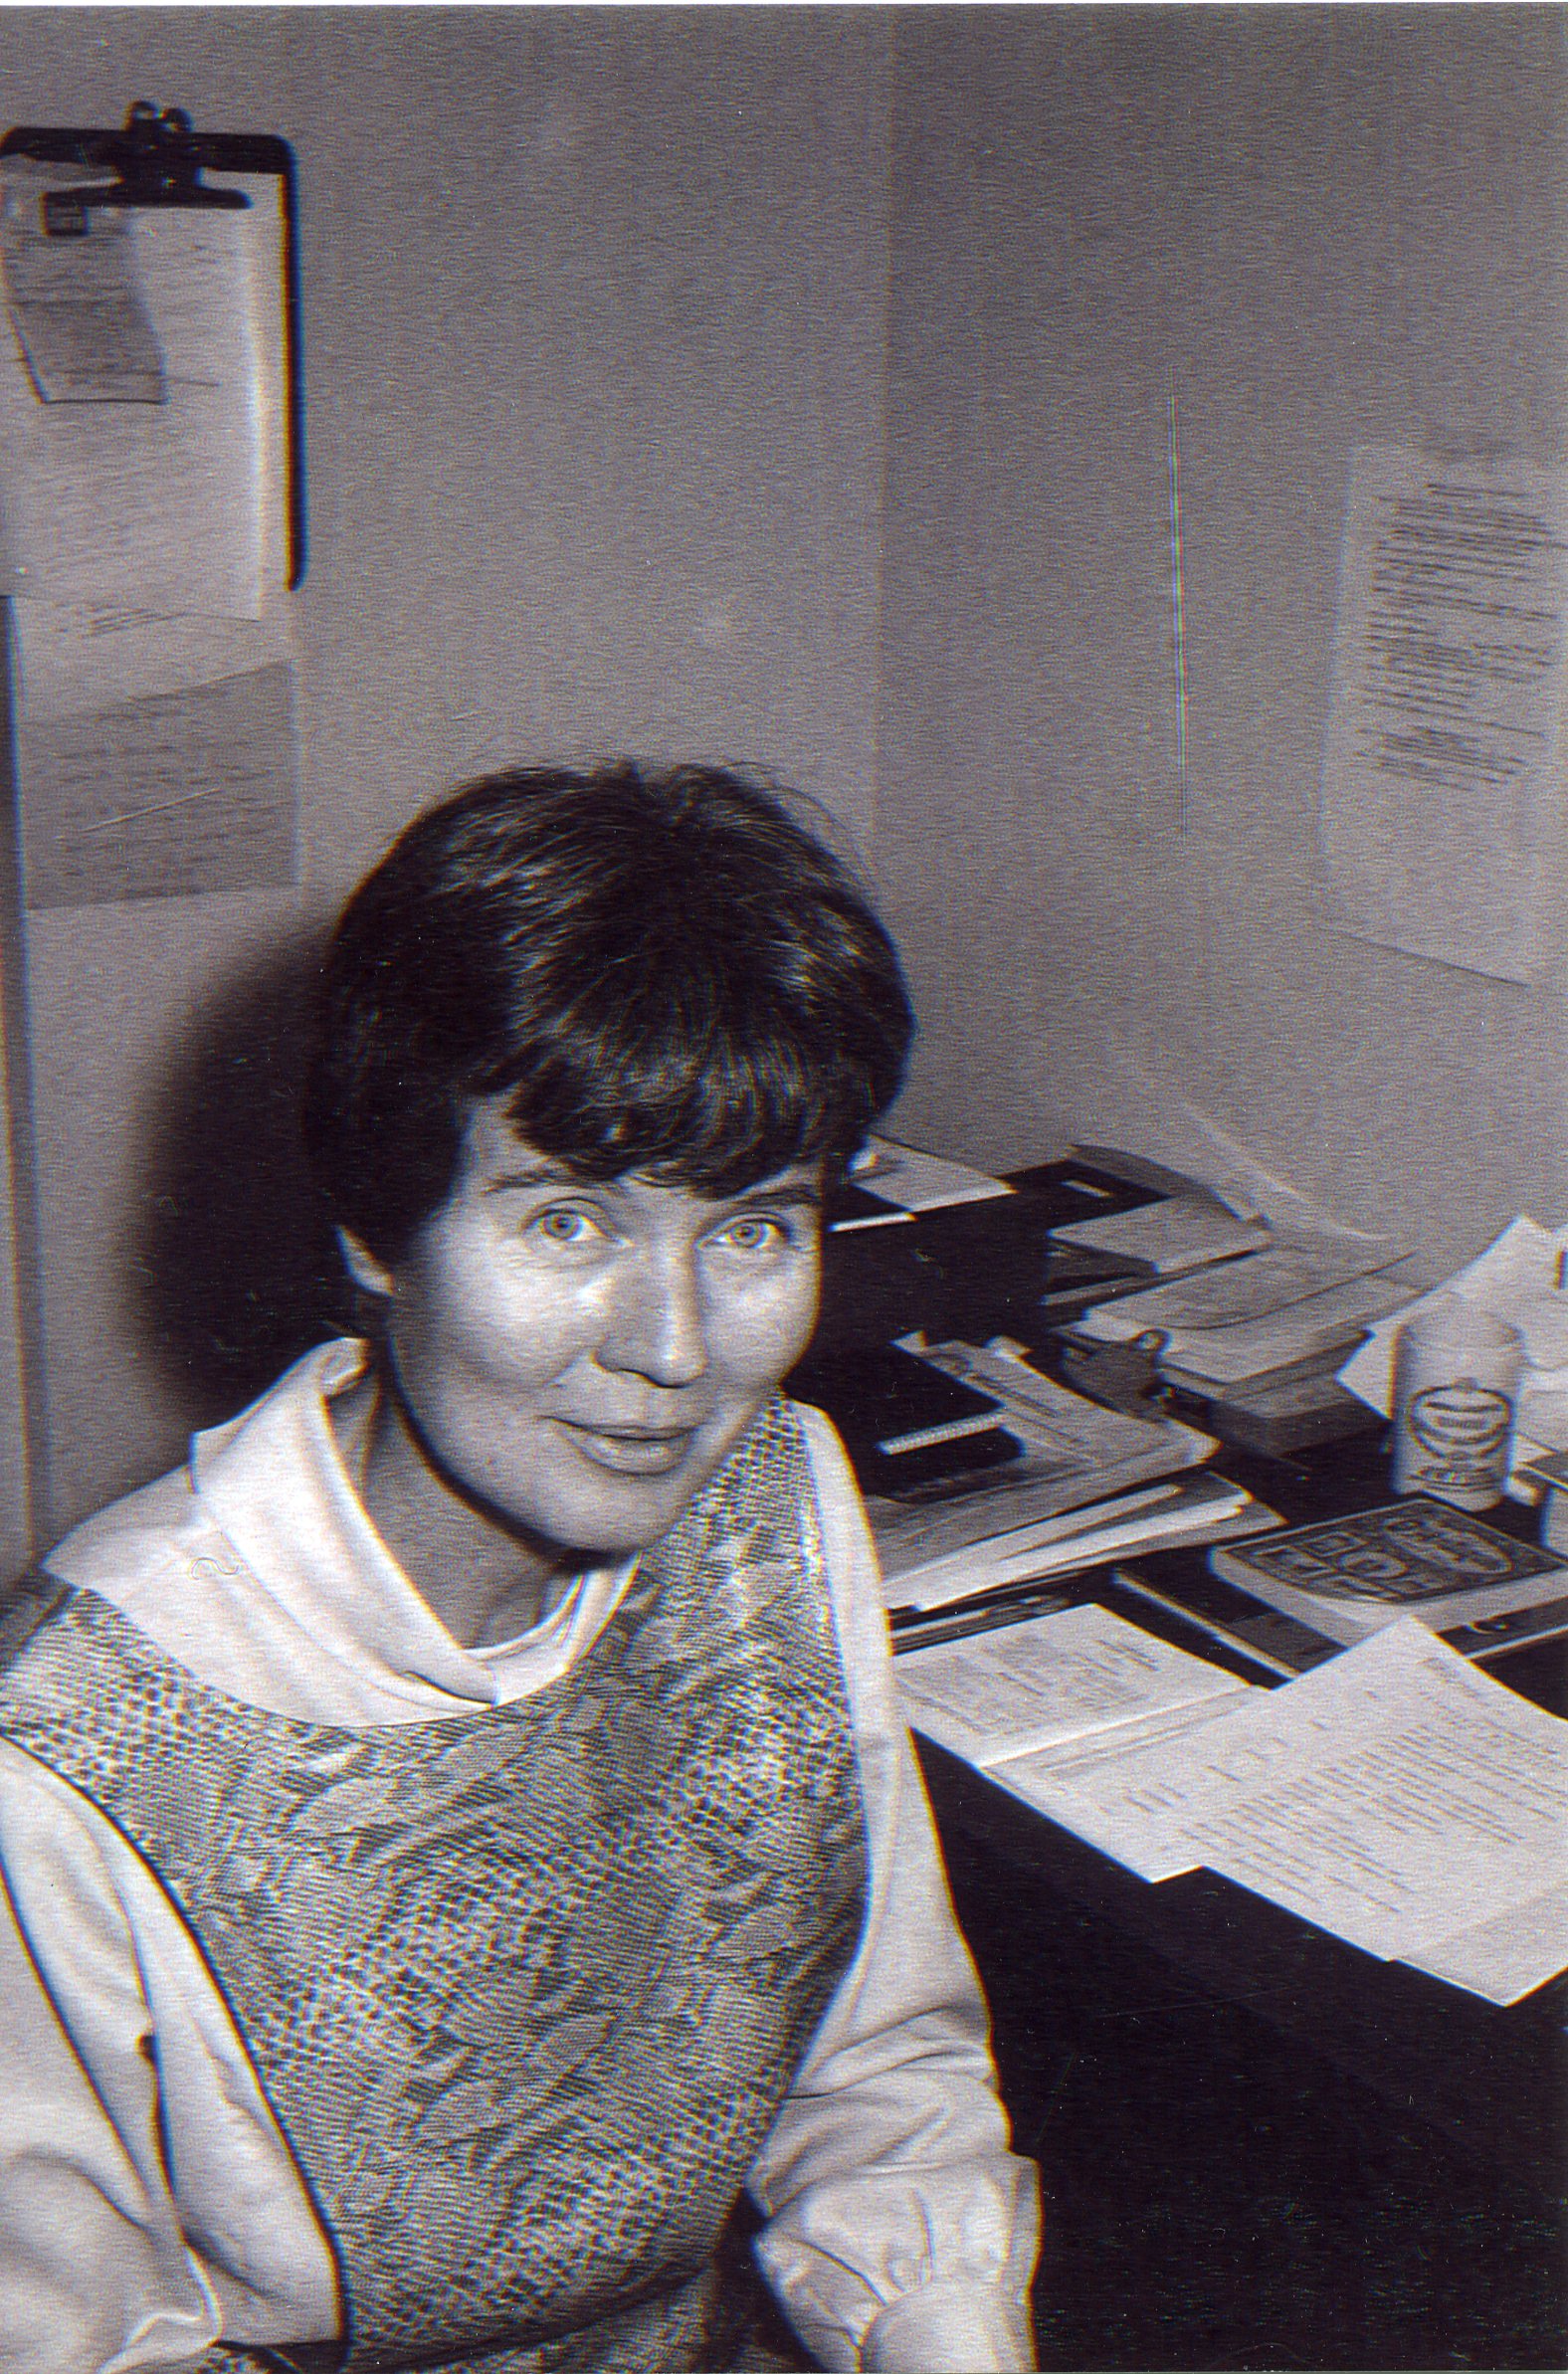 Iris as Acting Director of Anchorage Museum, 1971.